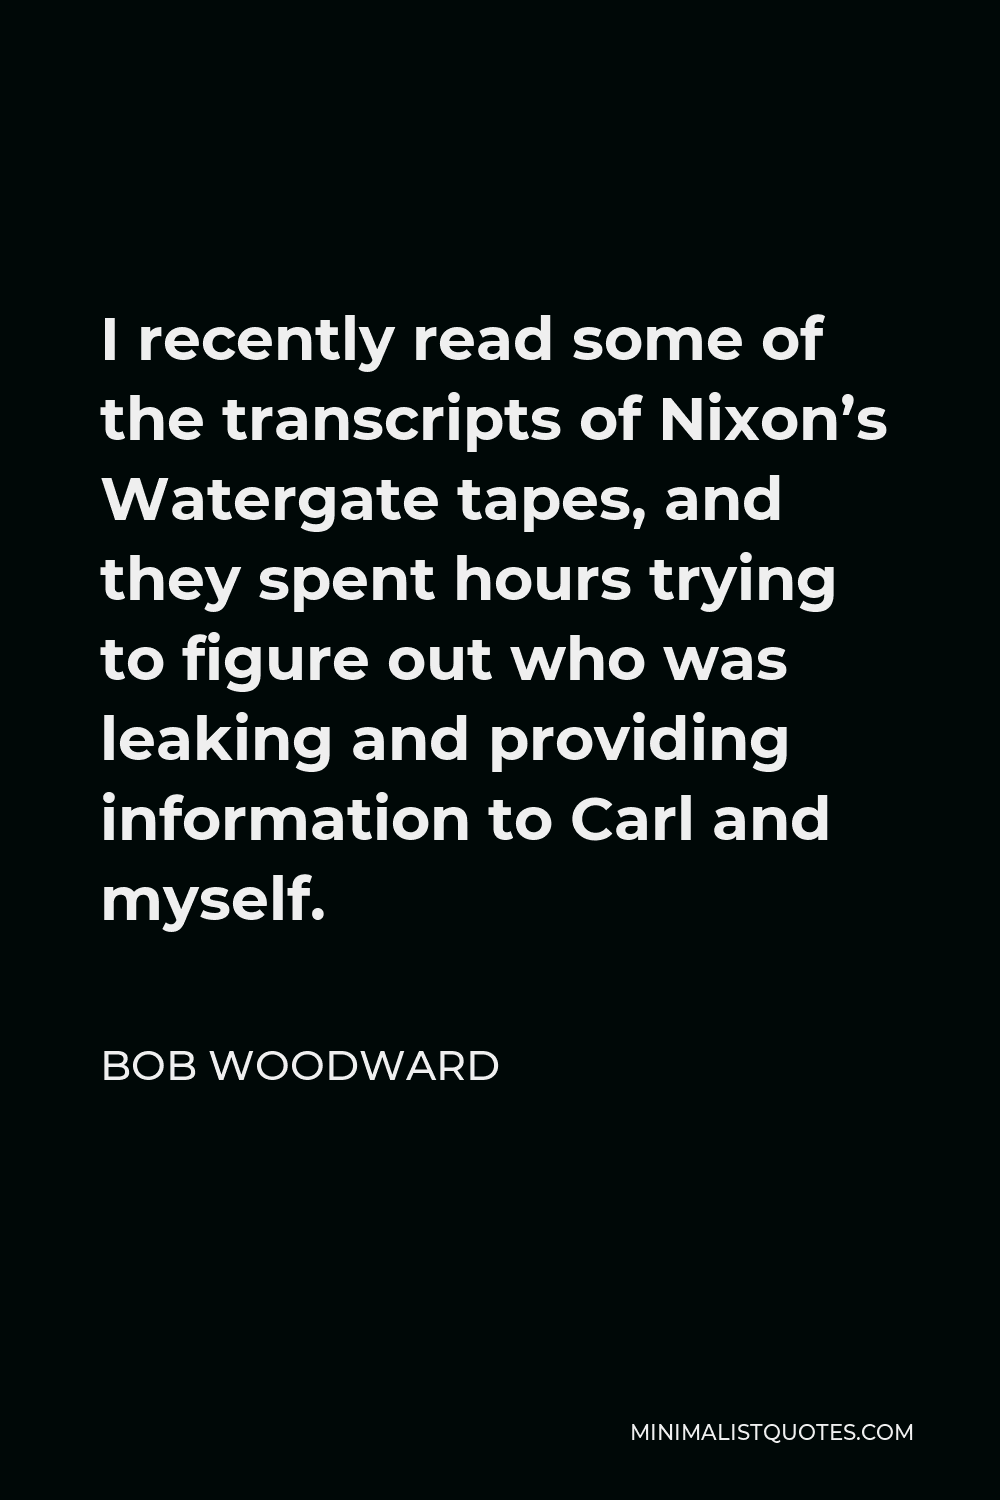 Bob Woodward Quote - I recently read some of the transcripts of Nixon’s Watergate tapes, and they spent hours trying to figure out who was leaking and providing information to Carl and myself.